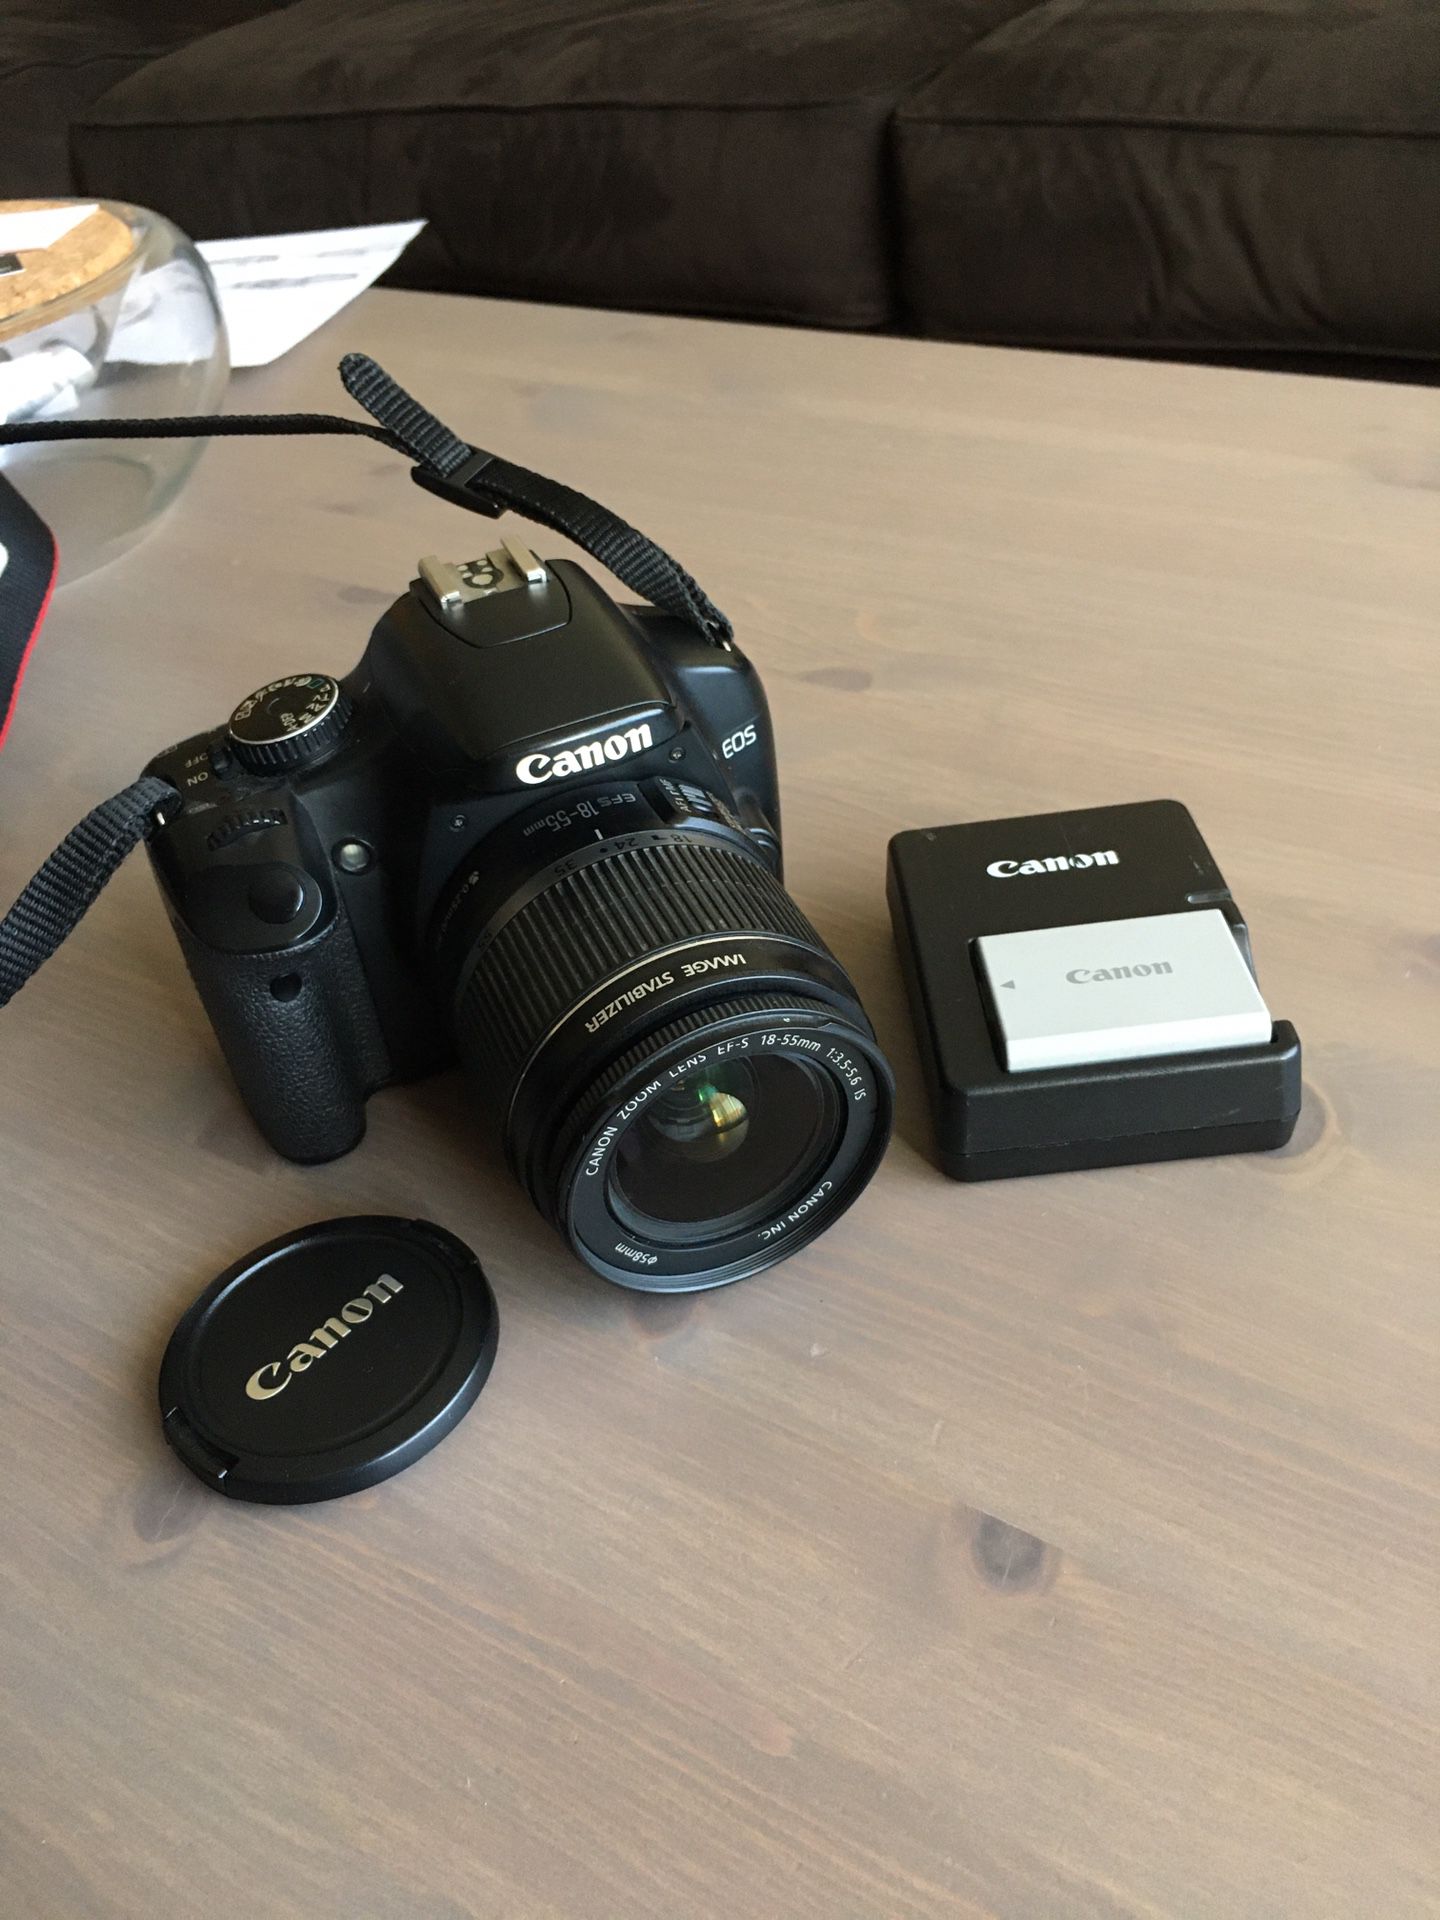 Canon EOS Rebel Xsi DSLR Camera with EF-S 18-55mm f3.5-5.6 IS Lens